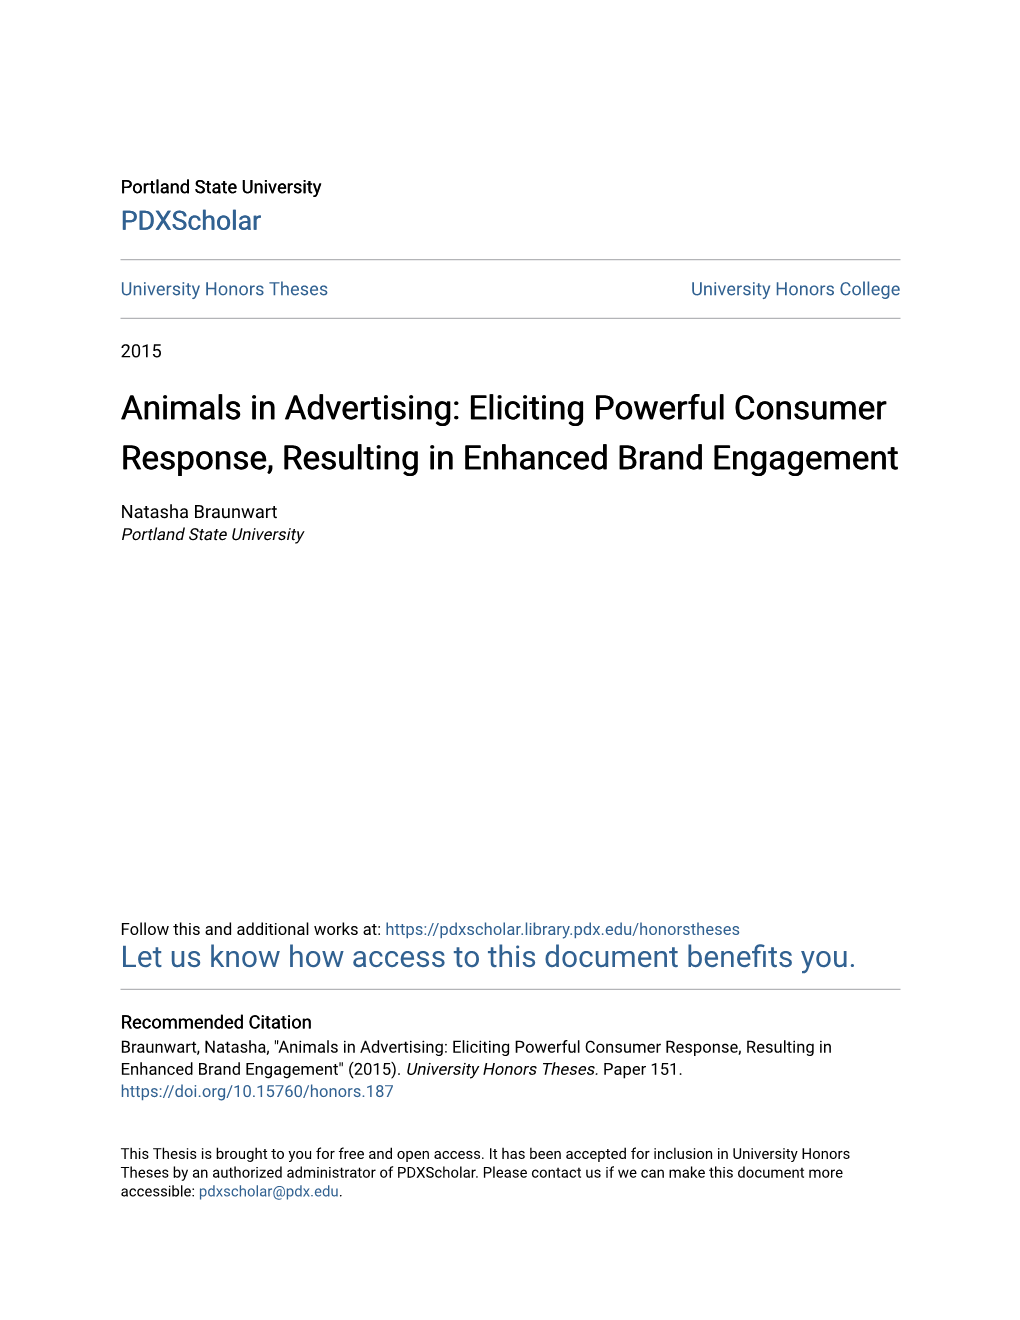 Animals in Advertising: Eliciting Powerful Consumer Response, Resulting in Enhanced Brand Engagement